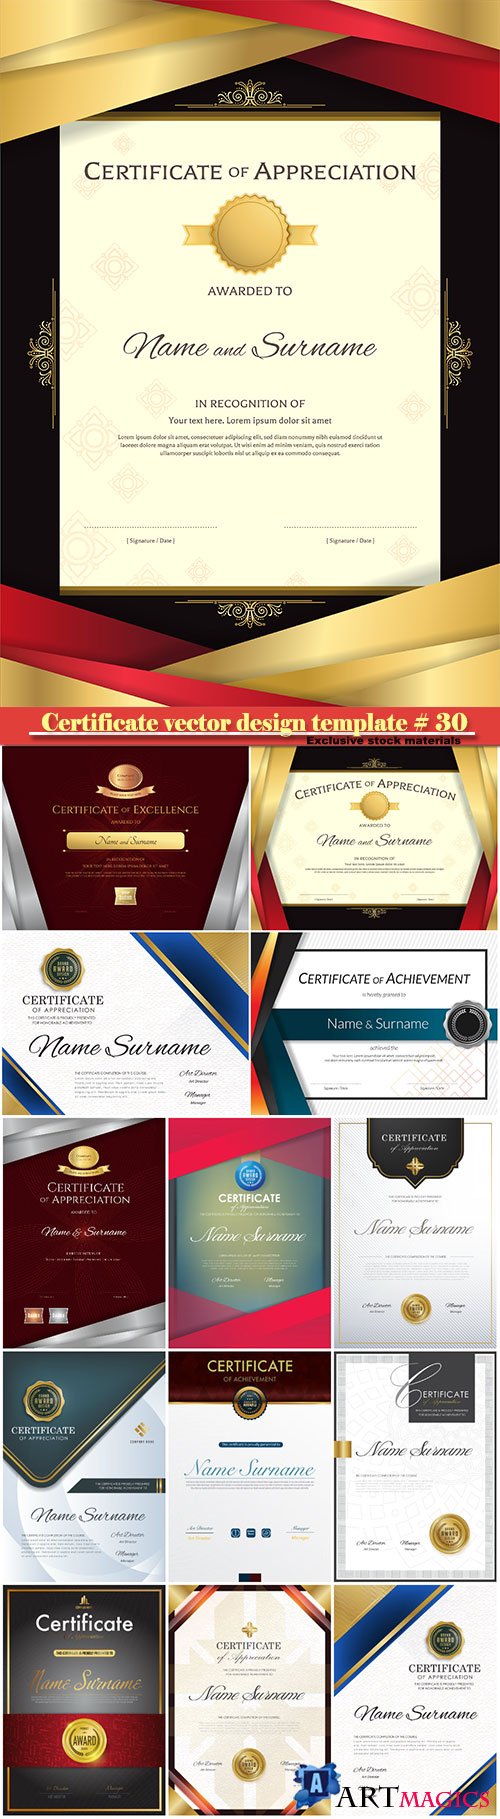 Certificate and vector diploma design template # 30